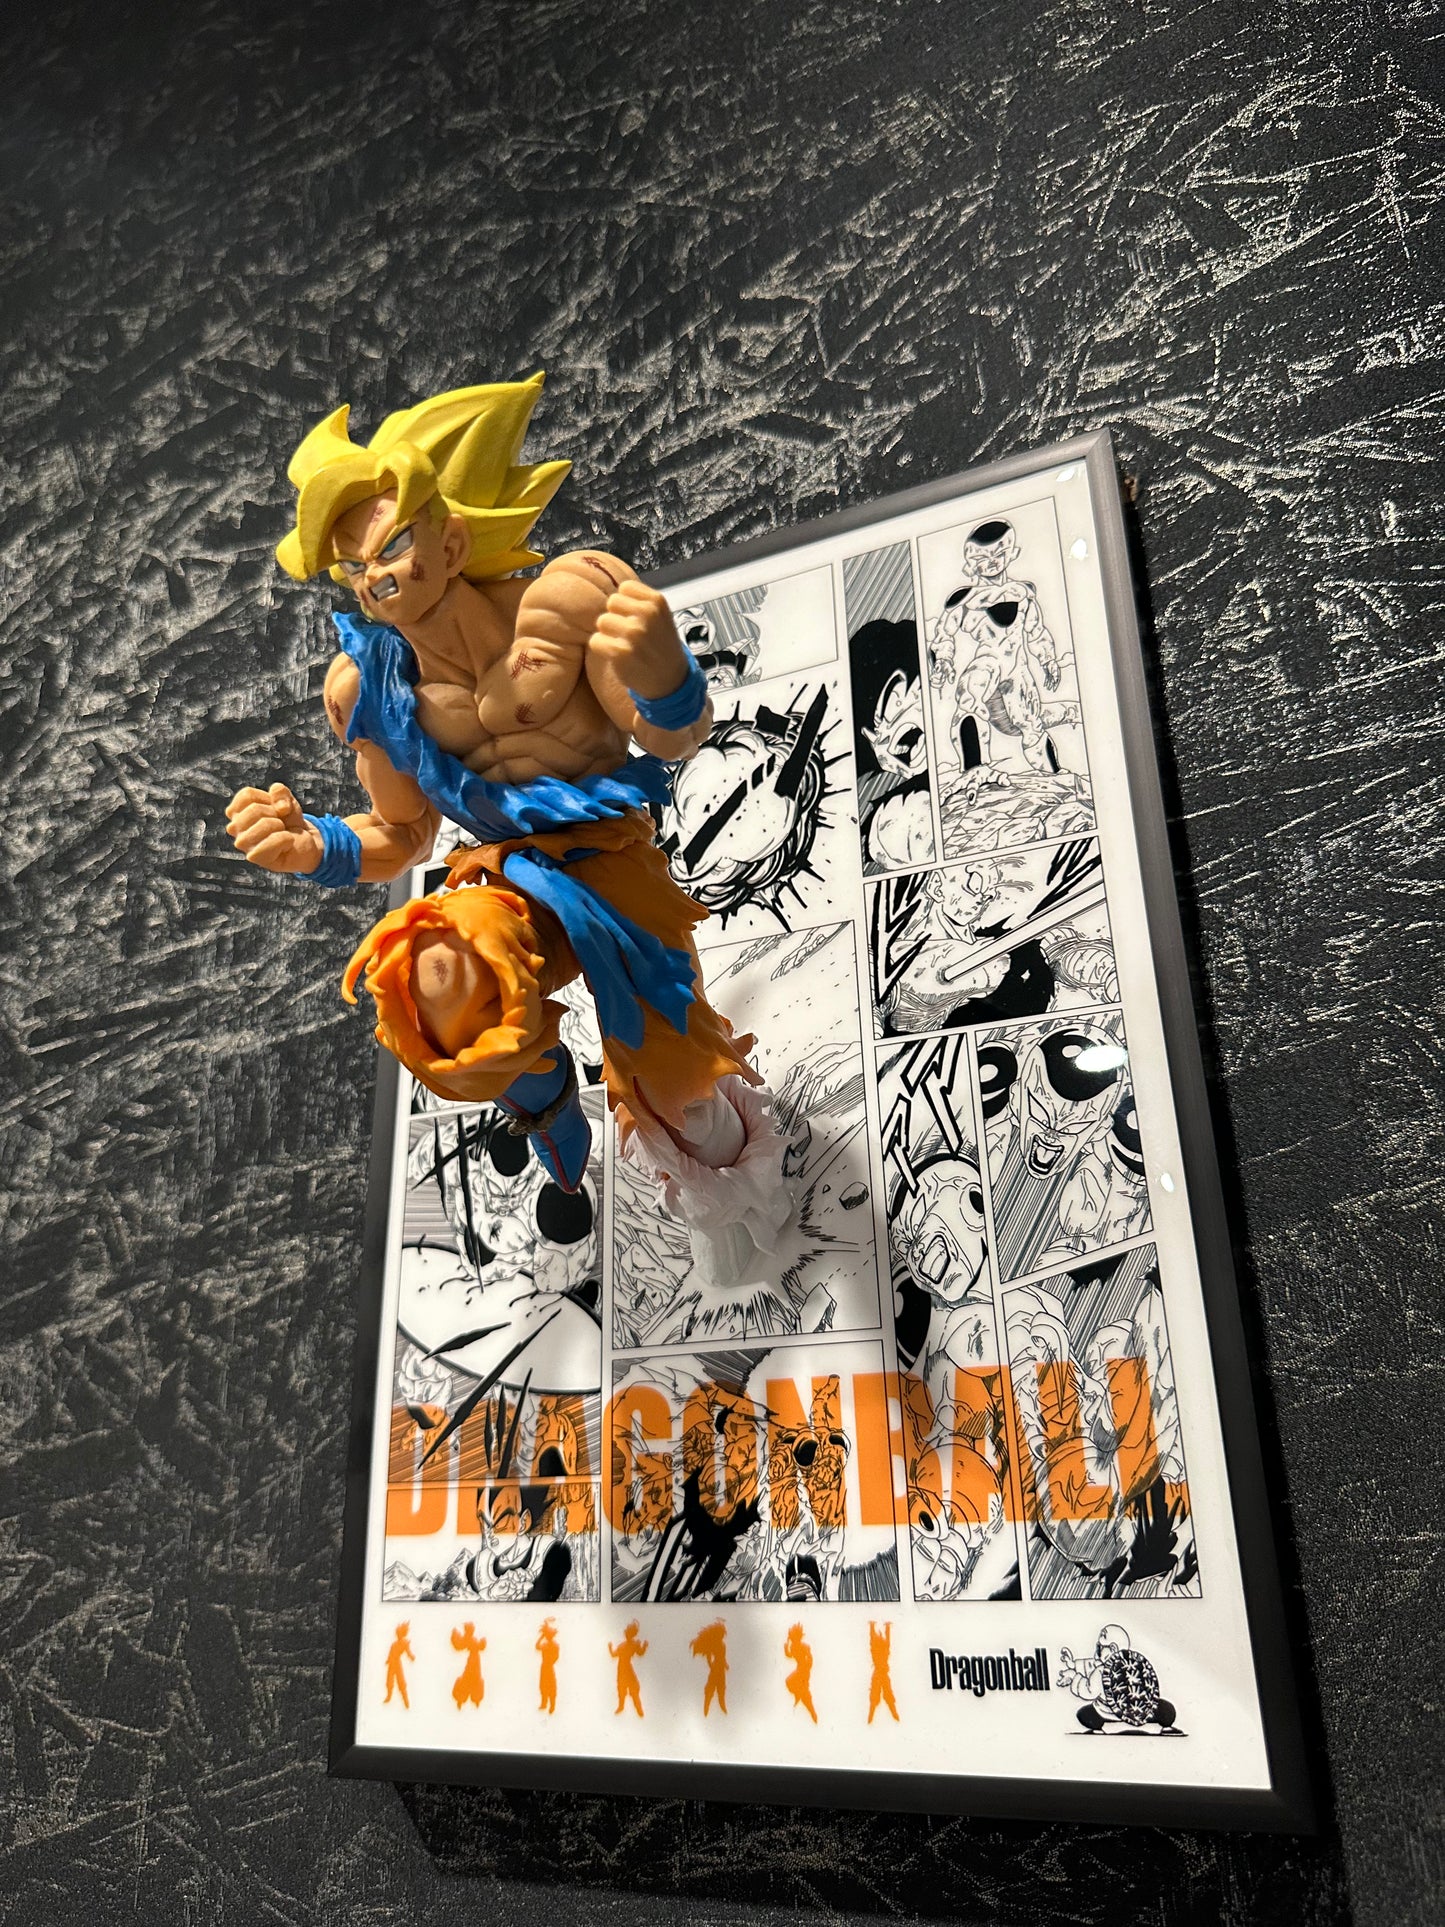 GOKU superseiyan running out from anime world 21cm*30cm